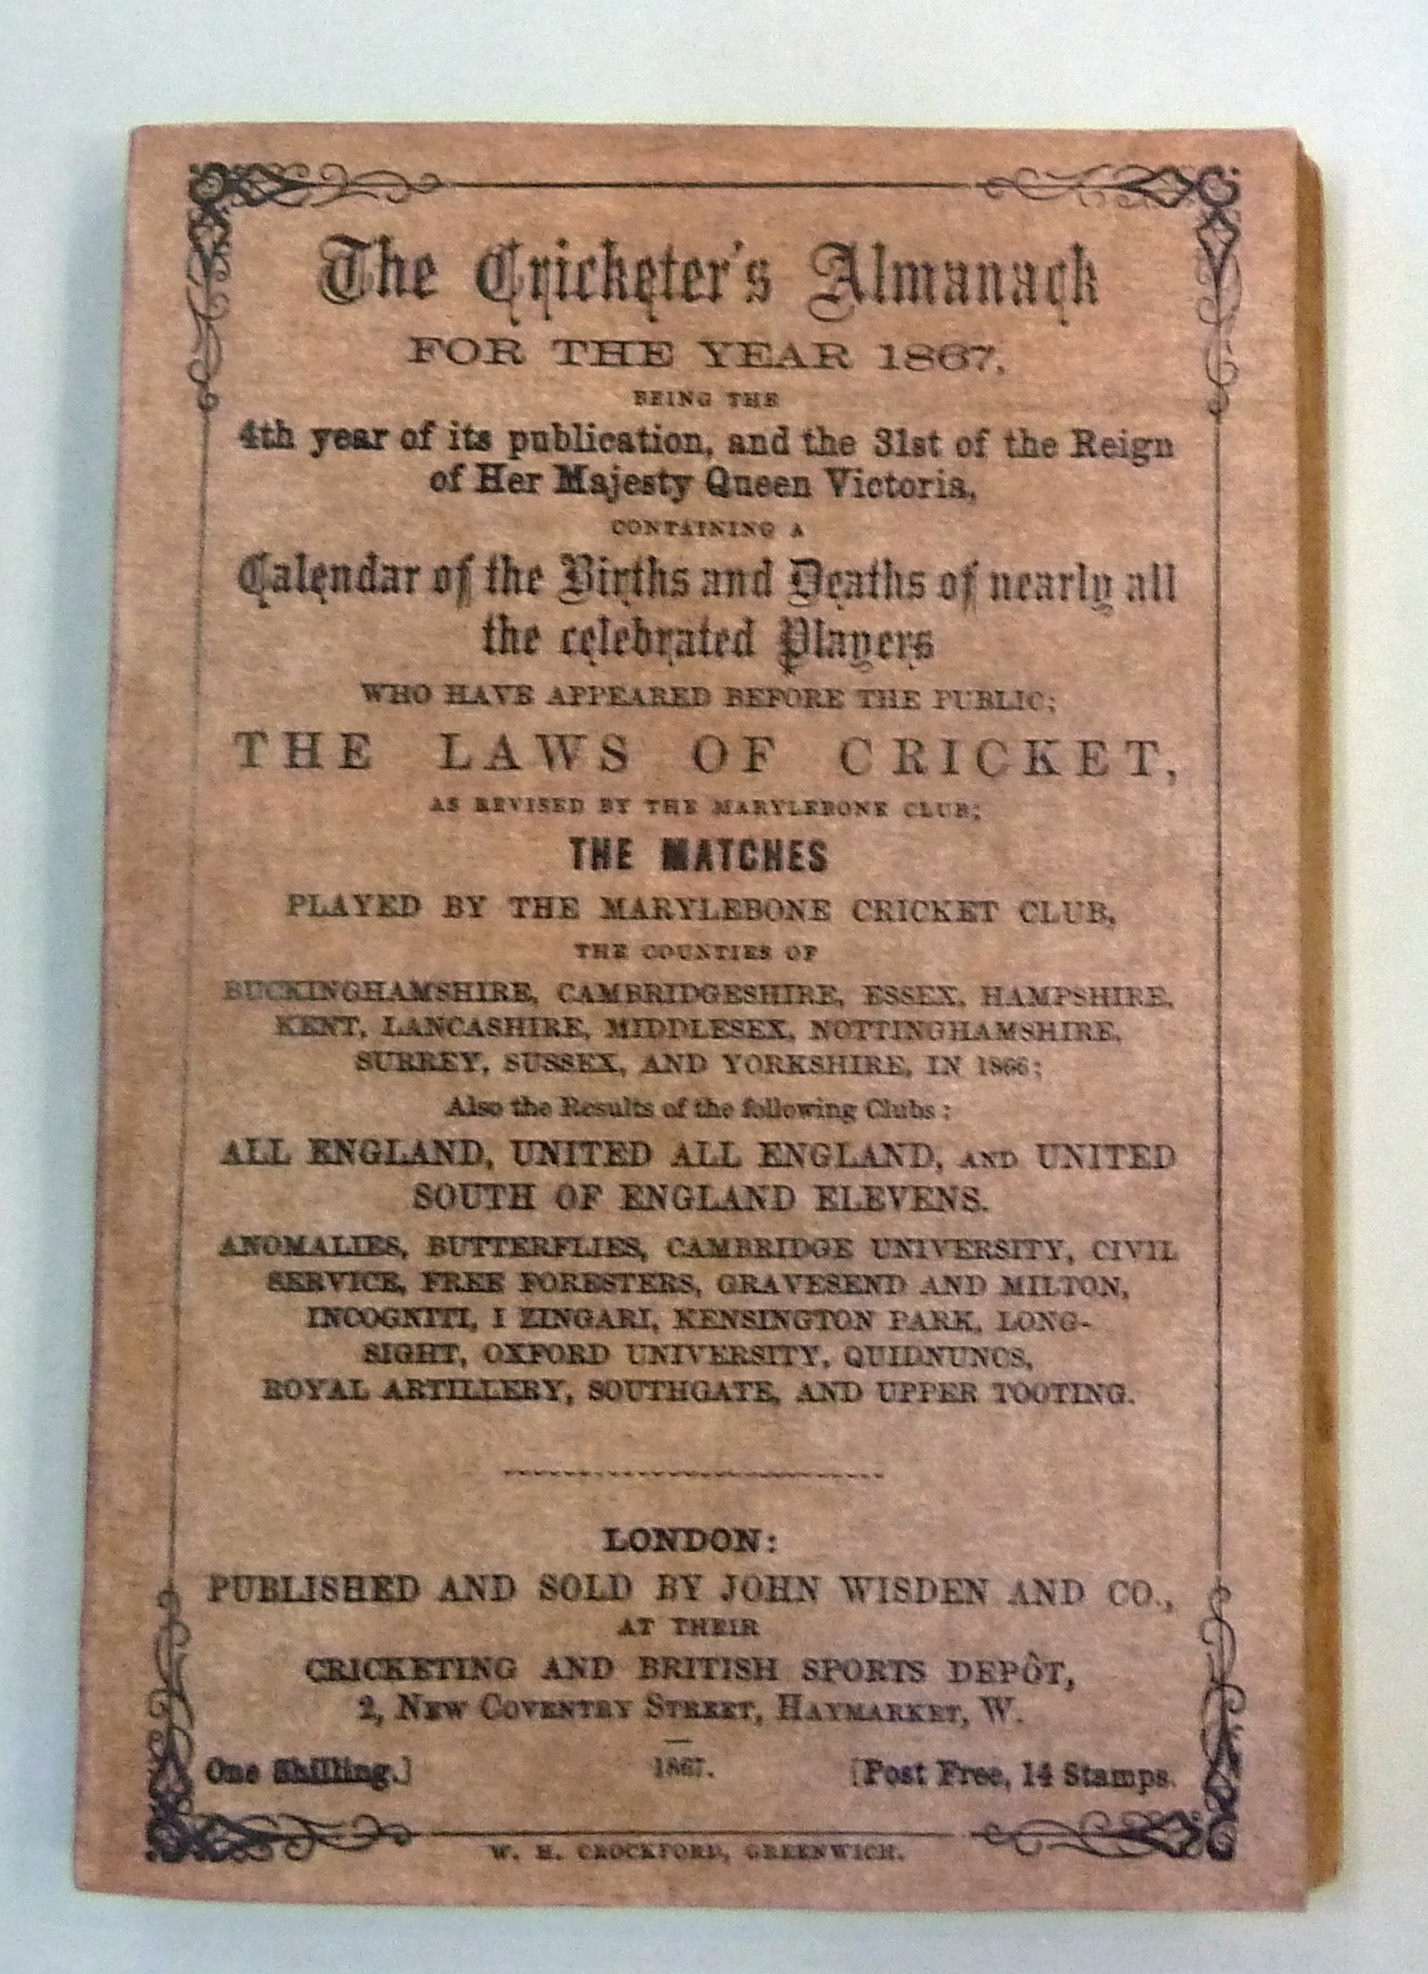 Wisden The Cricketer's Almanack for the Year 1867